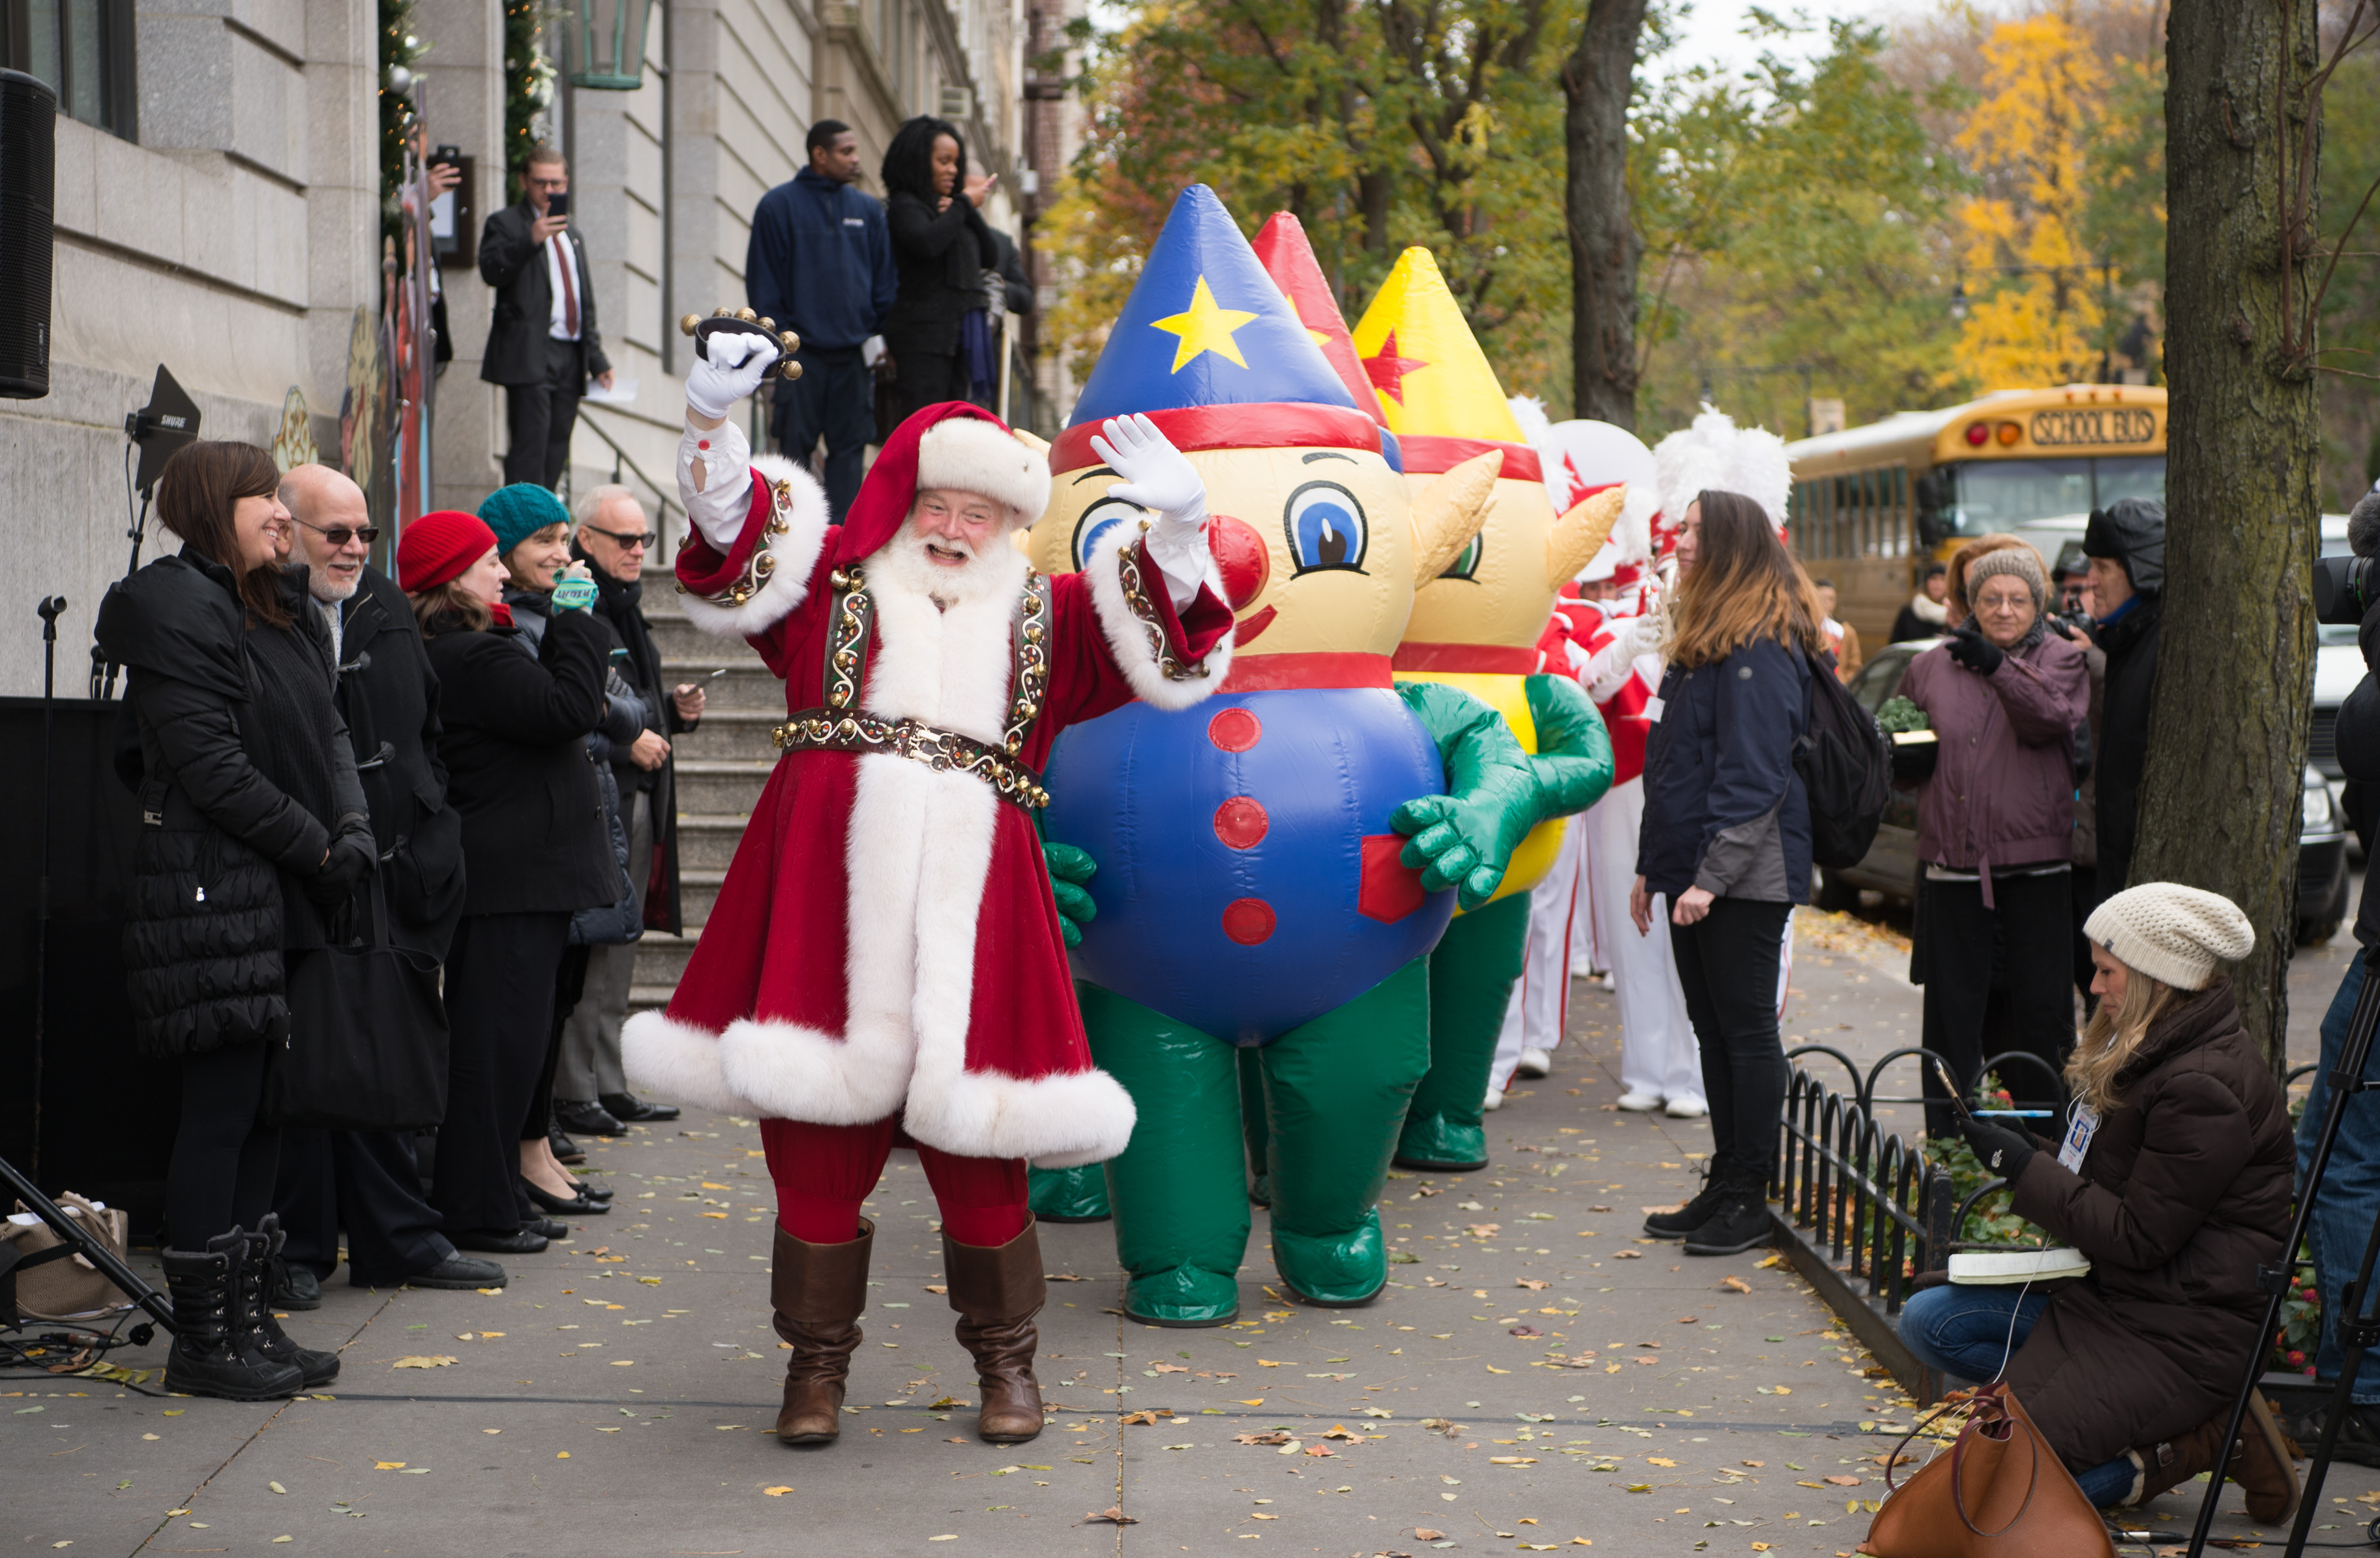 How To Stream The Macy's Thanksgiving Day Parade, So You Can Kick Off - Stream Ma Eys Thanksgiving Day Parade